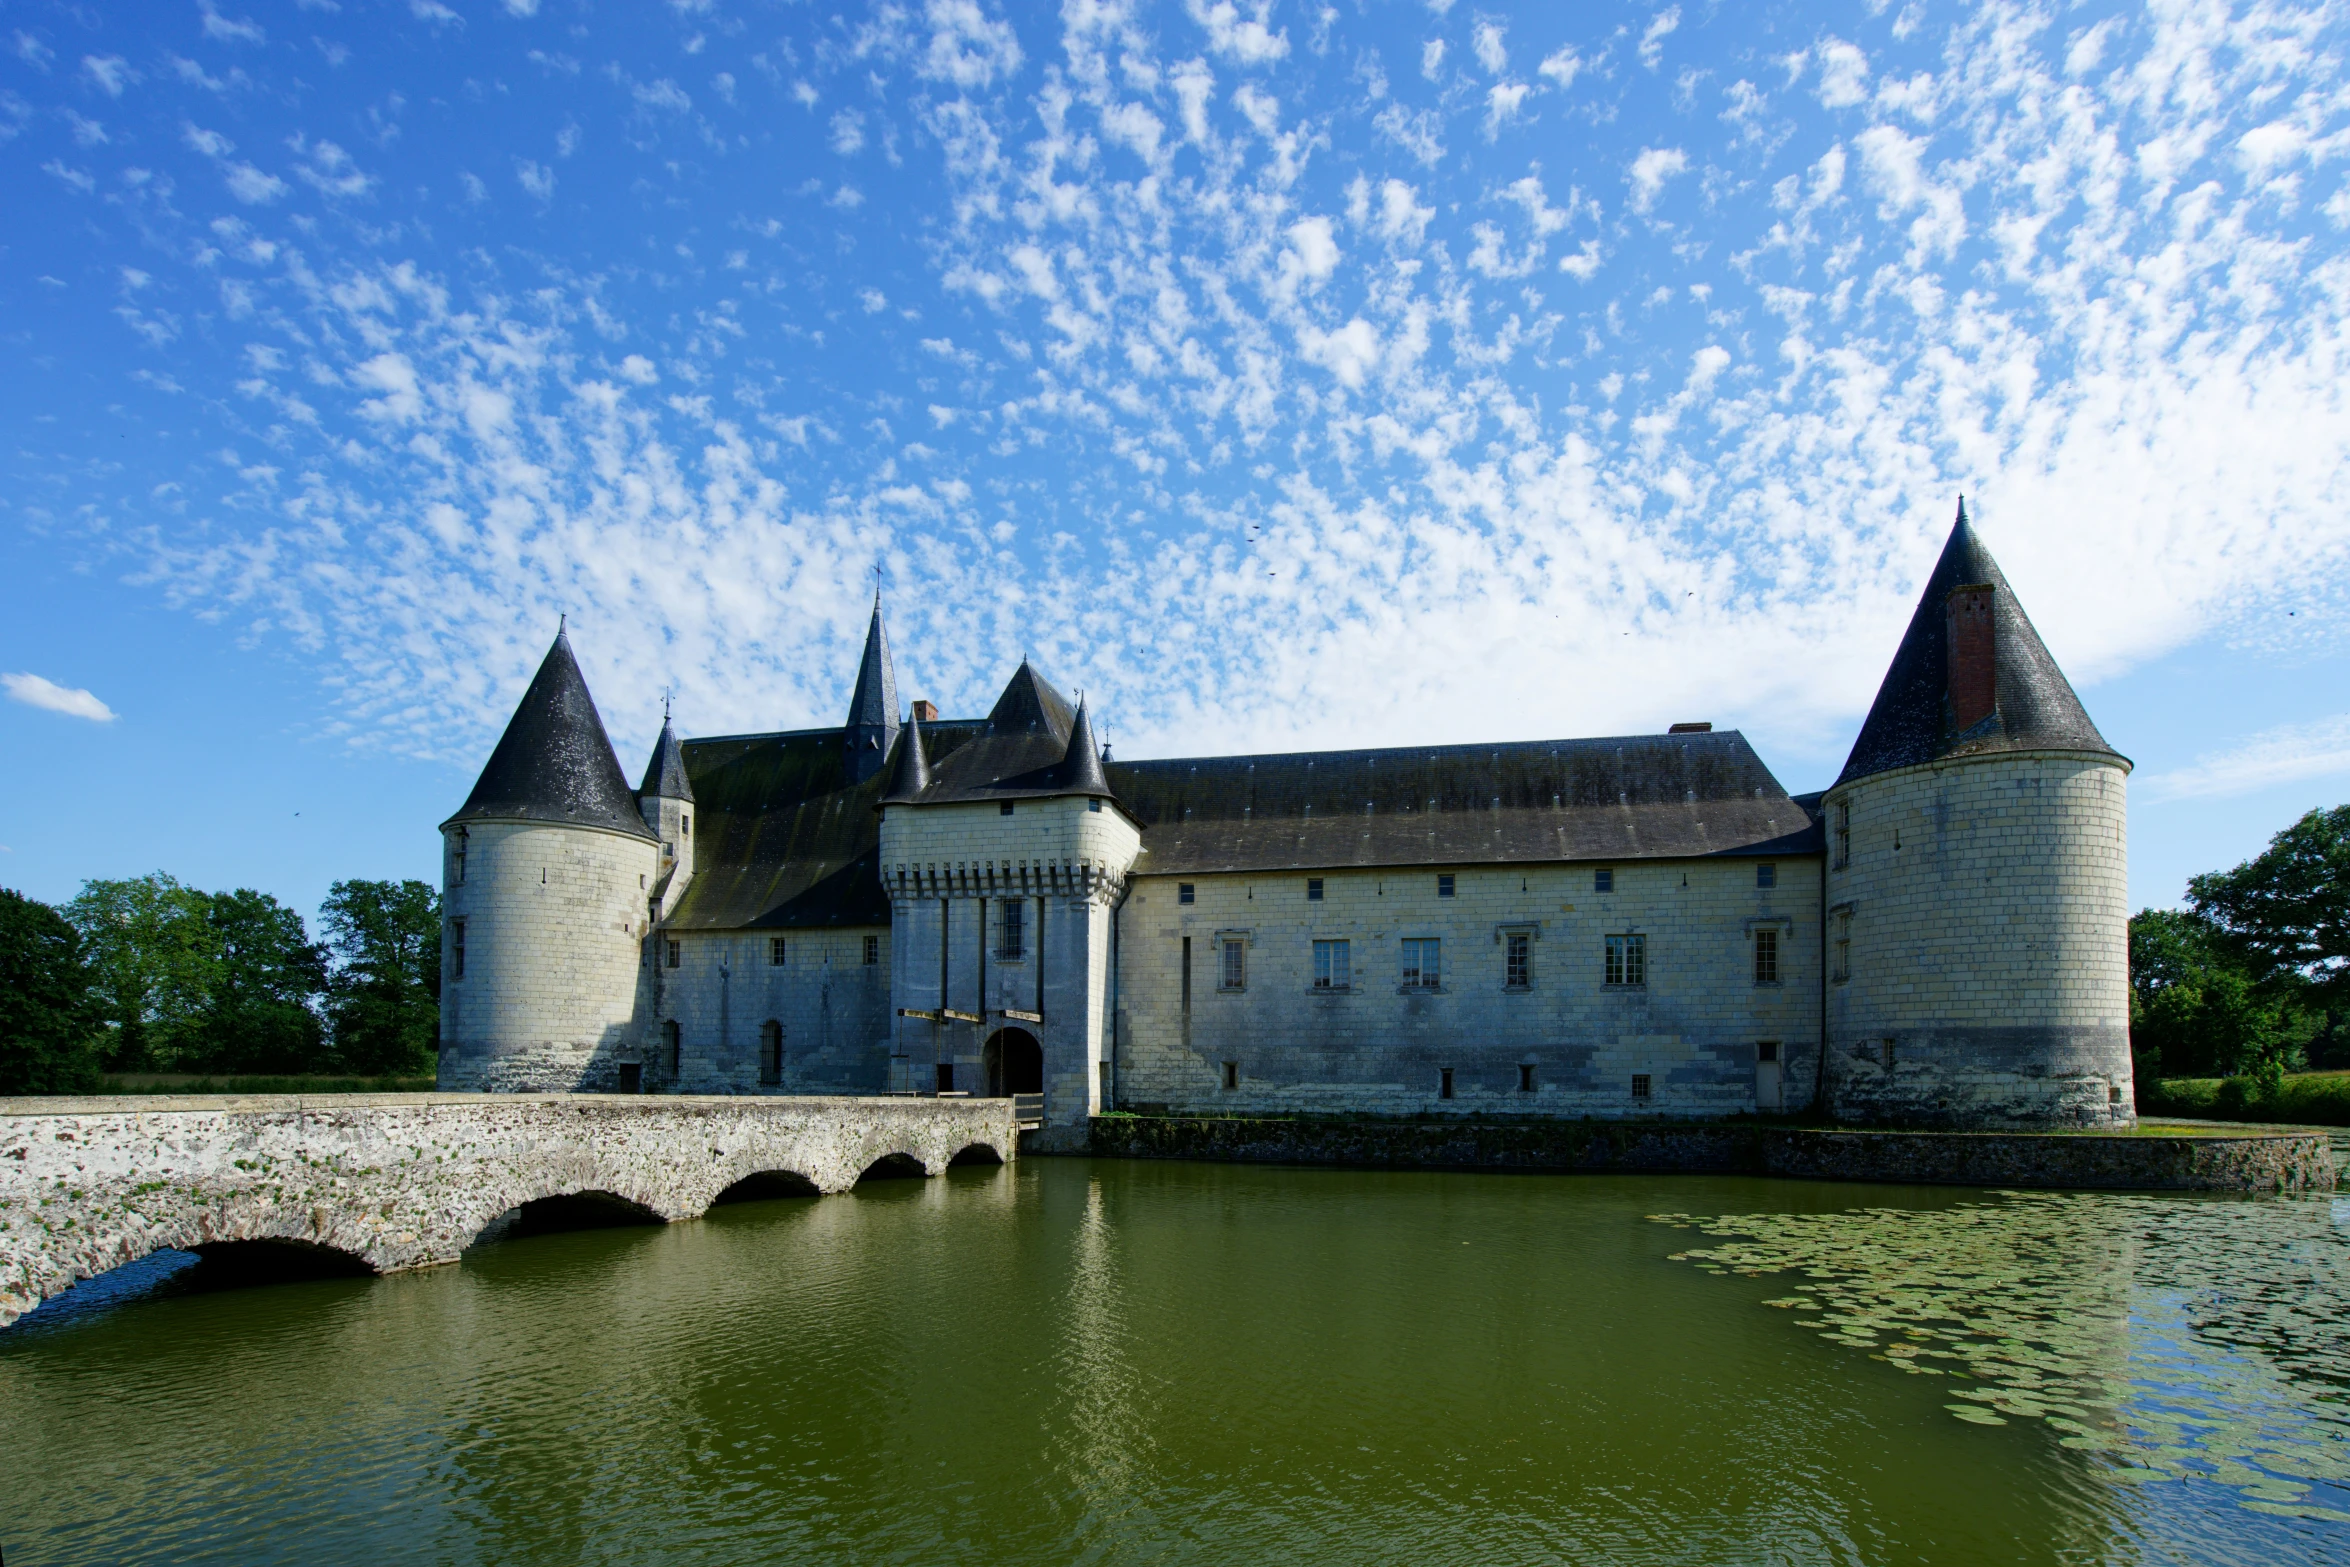 the old castle sits on the water and is surrounded by large buildings